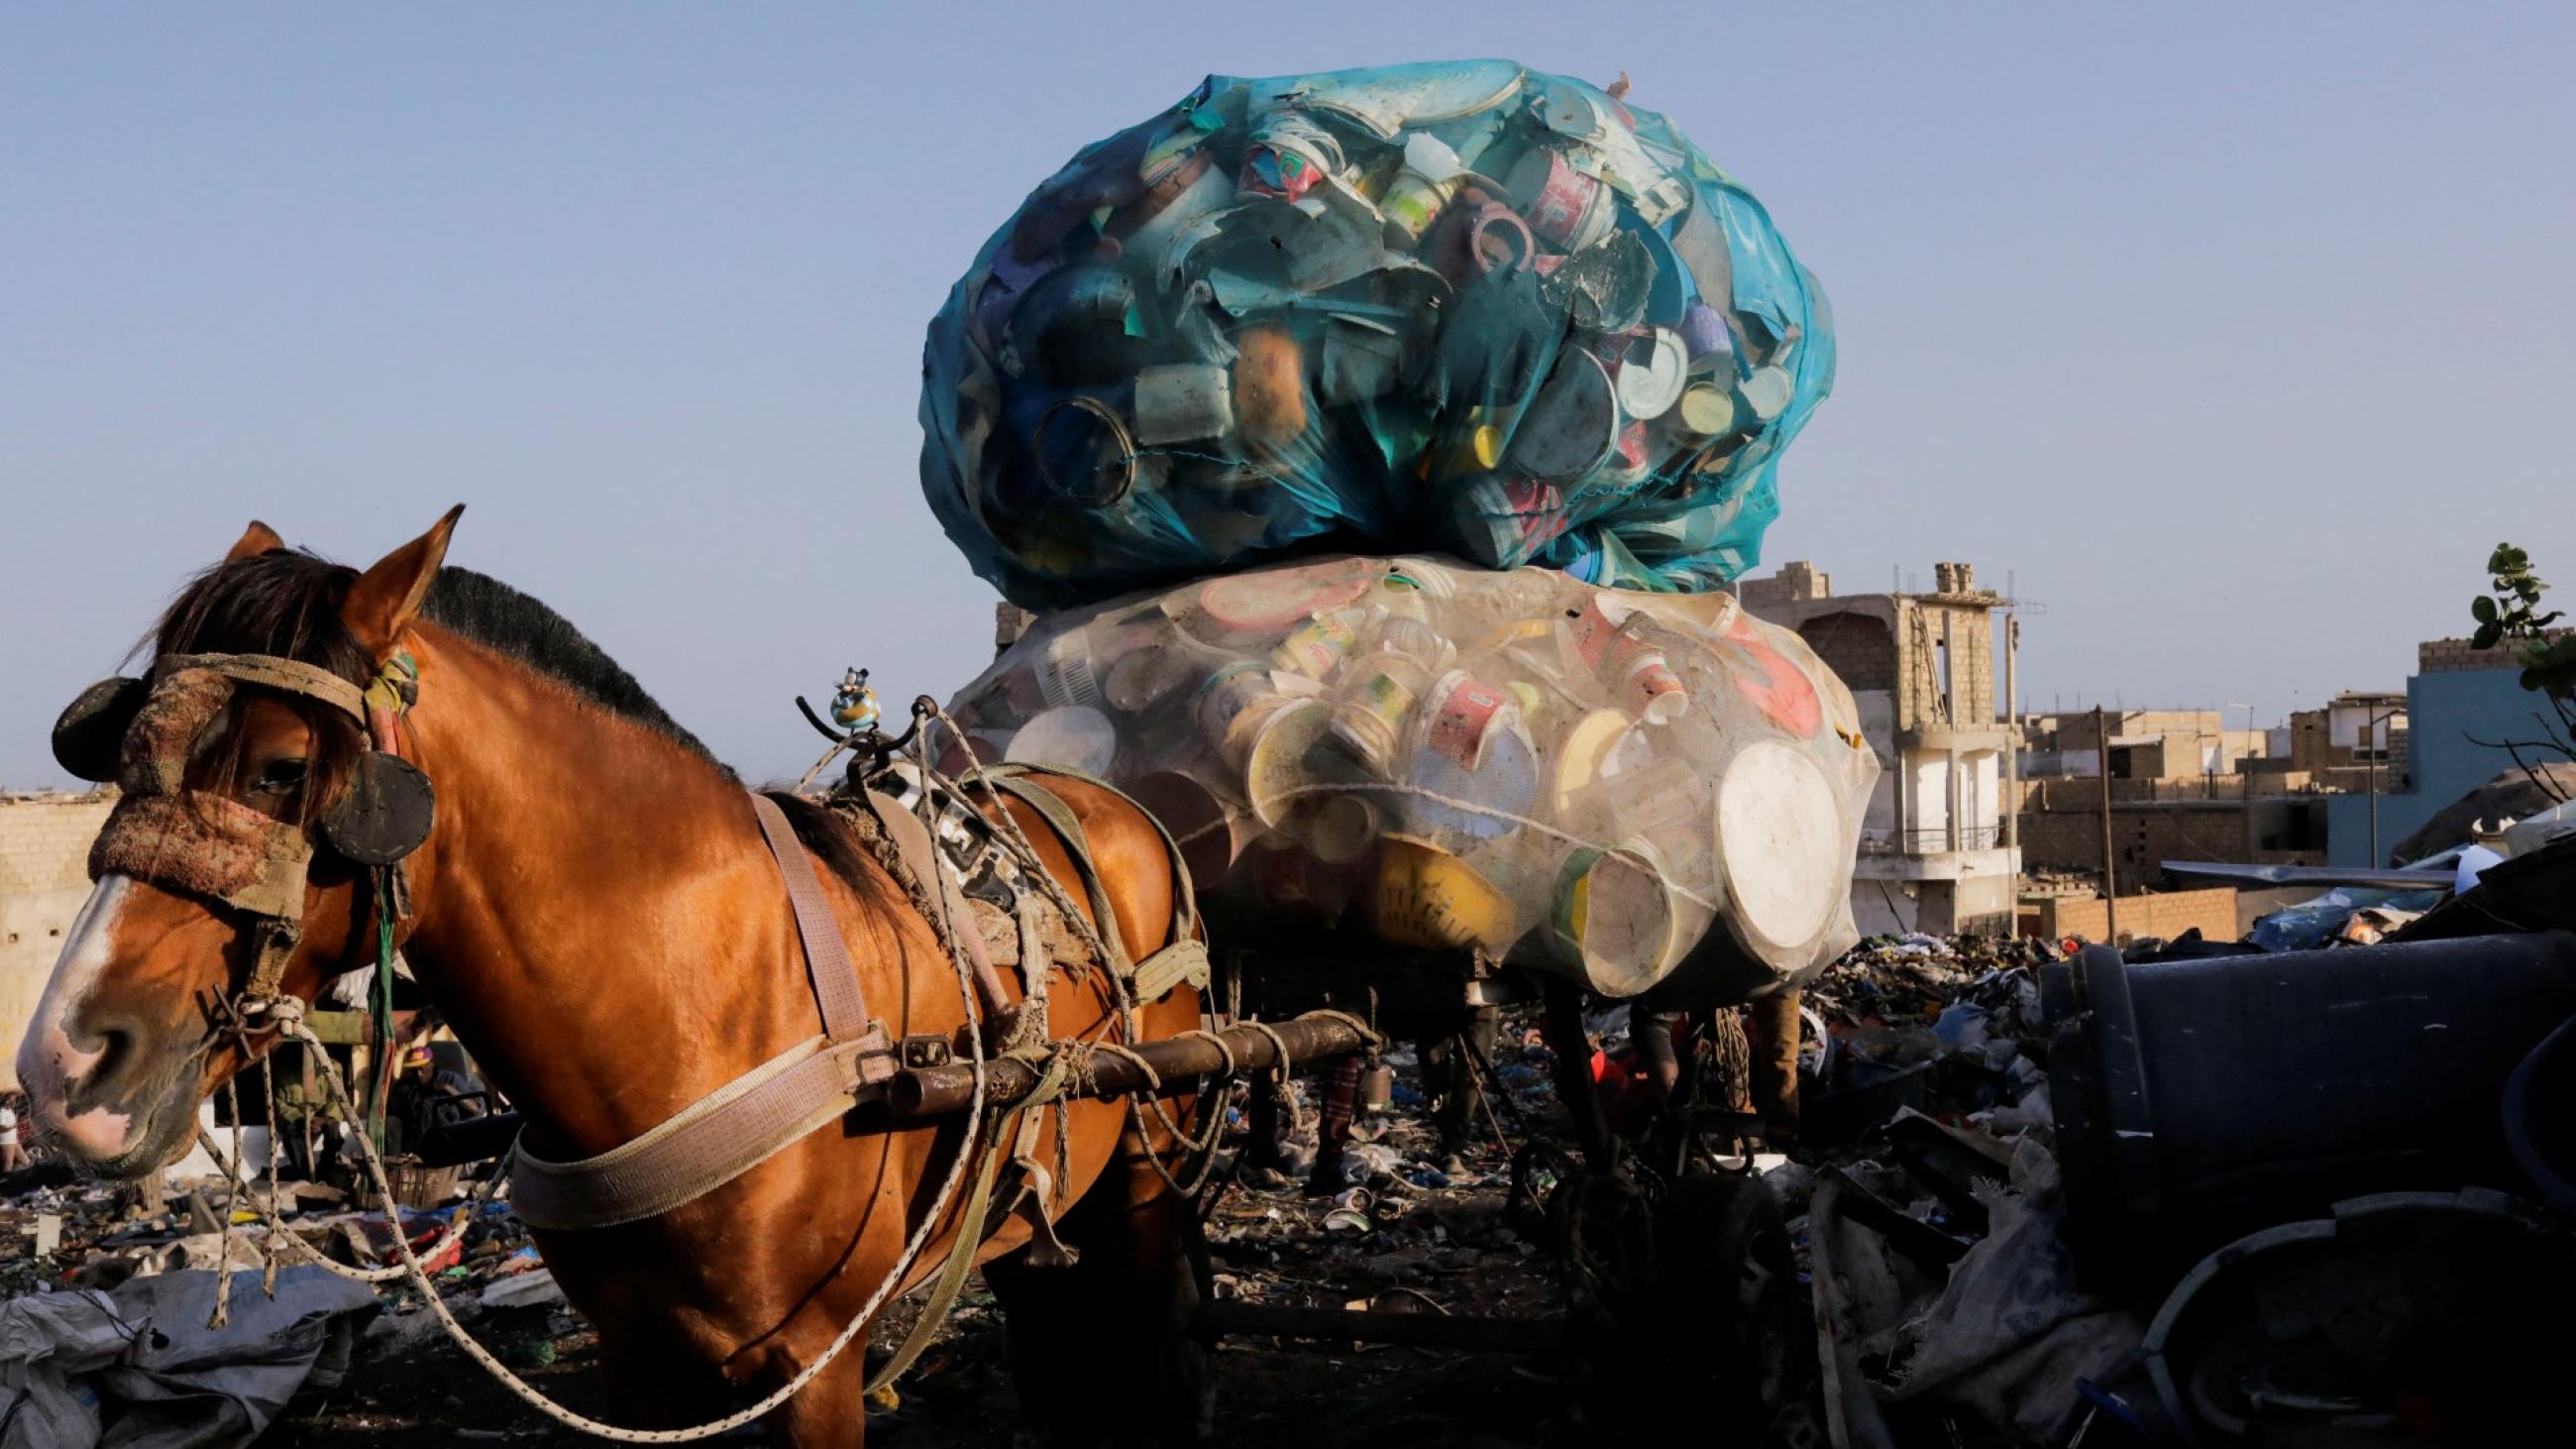 A chestnut colored horse with a black mane stands outside of landfill carrying a cart filled with plastic bottles